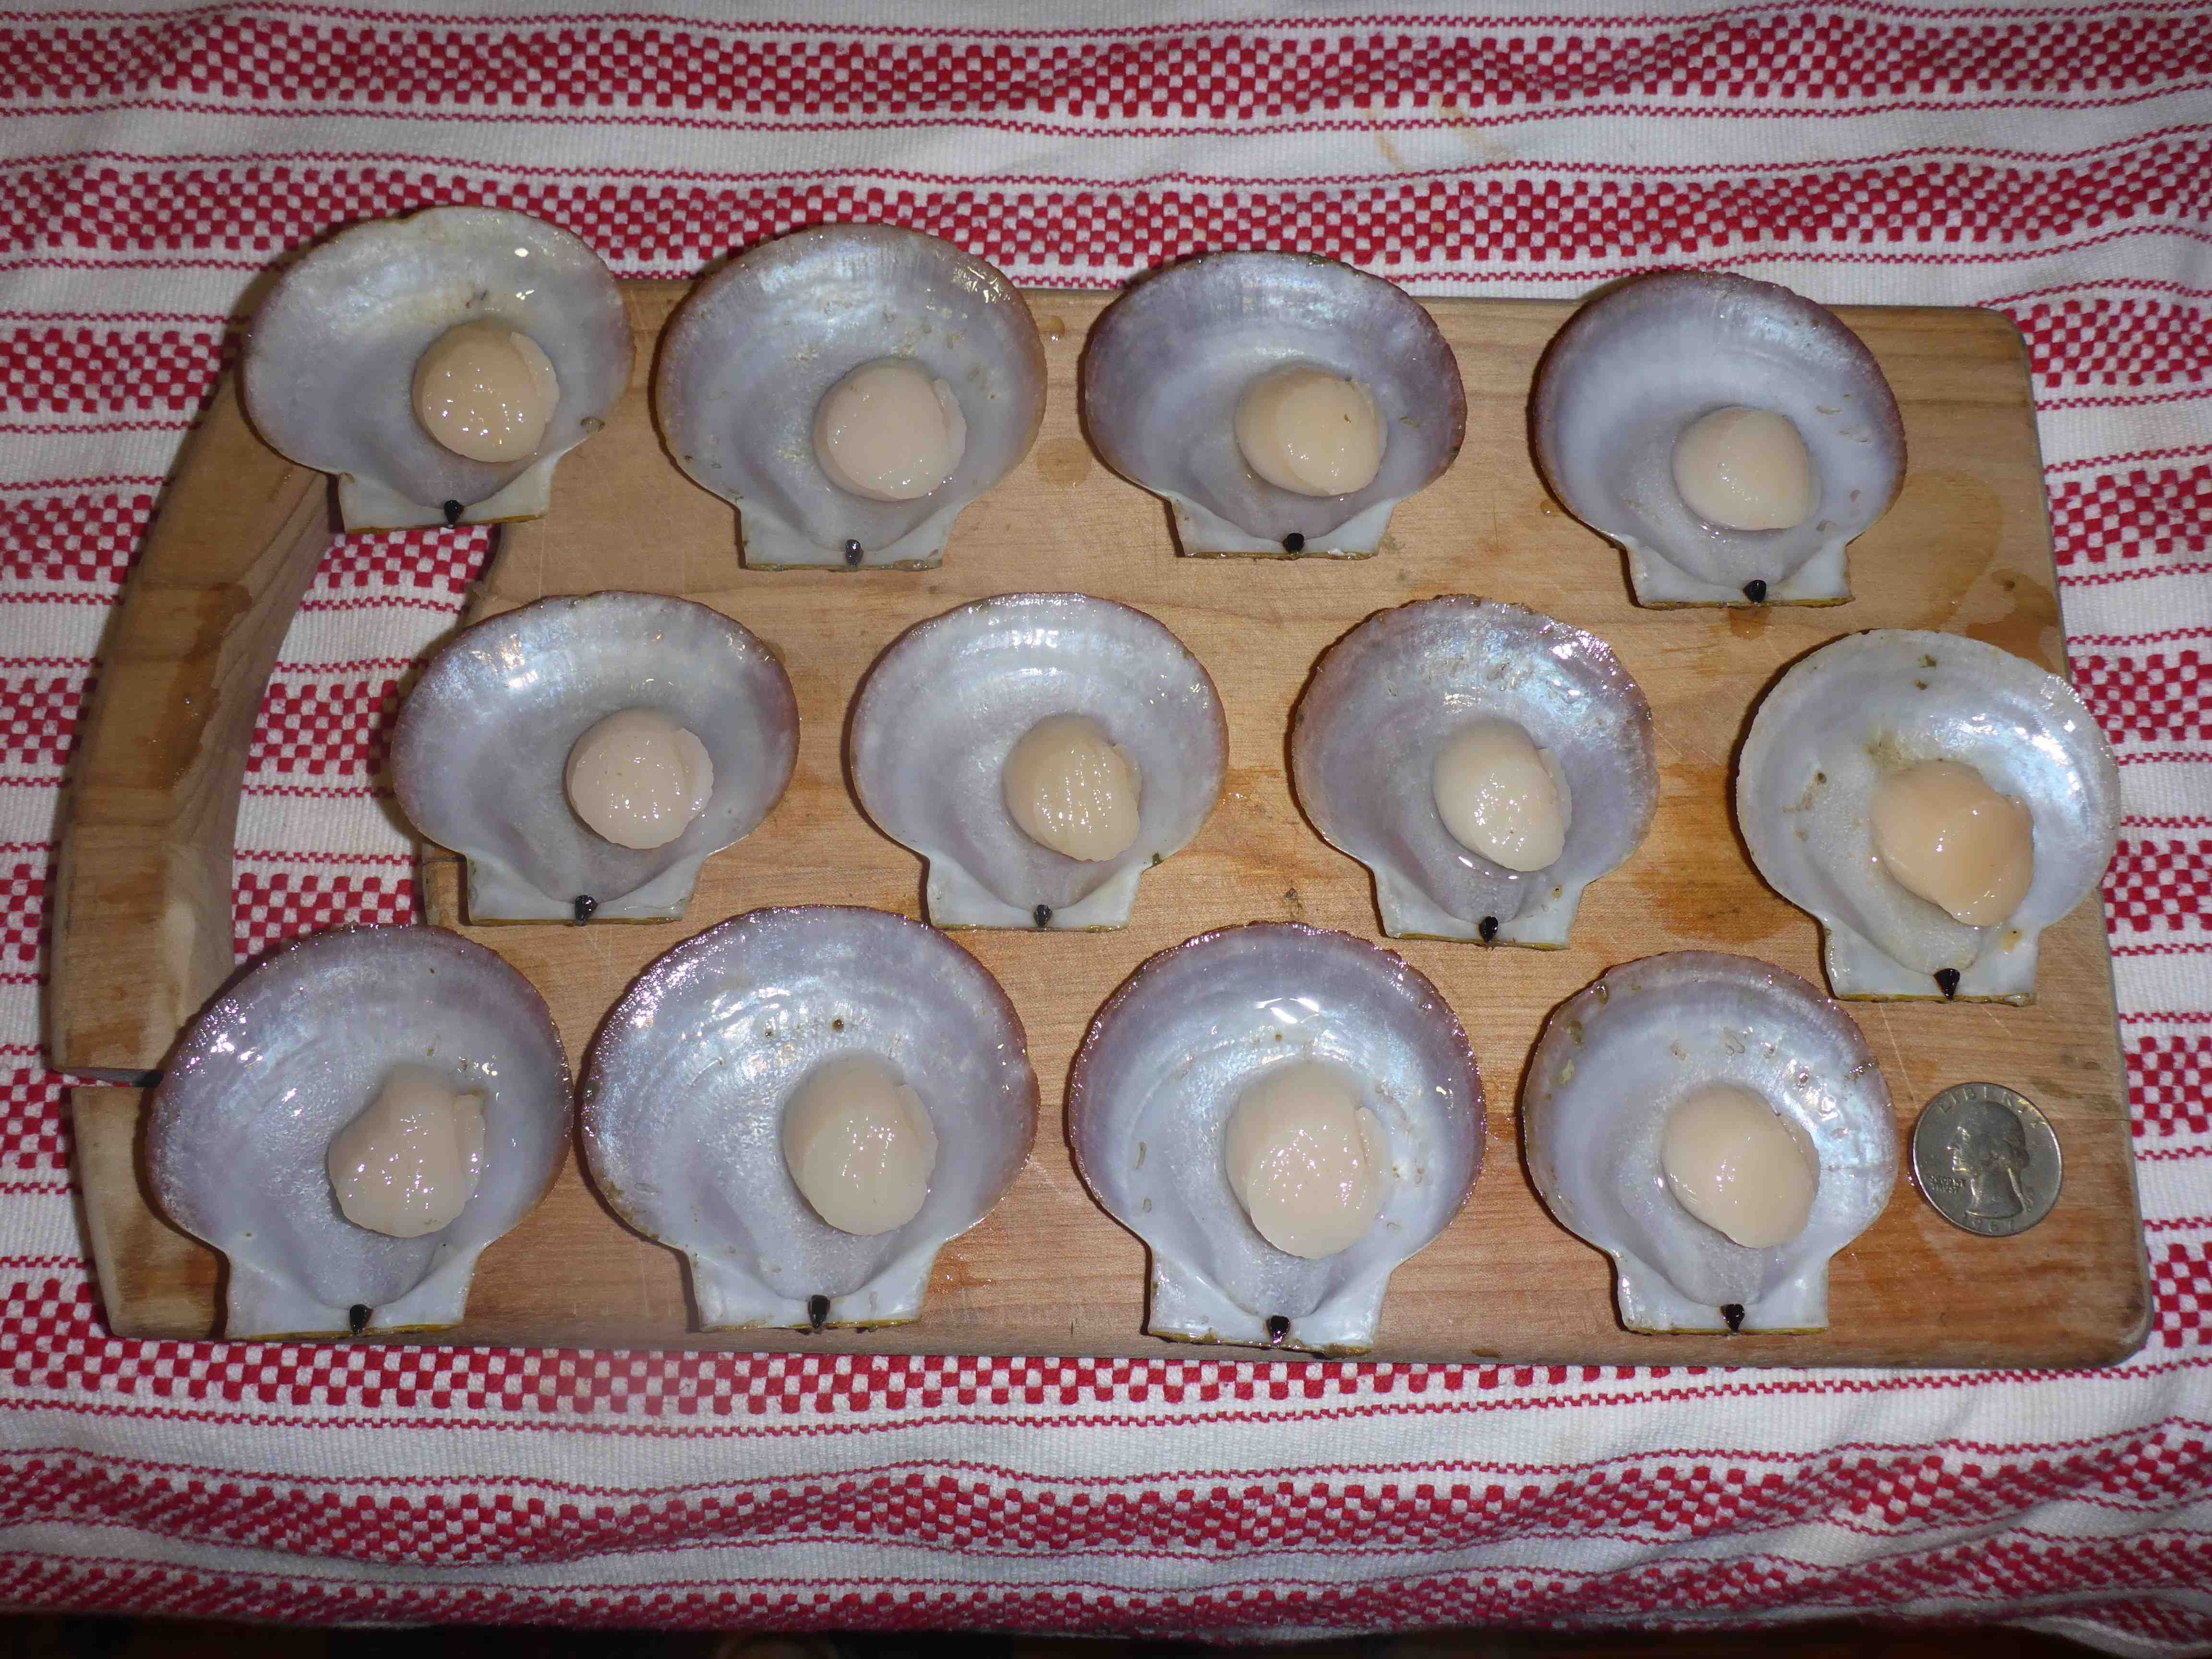 twelve scallops with meat on the half-shell